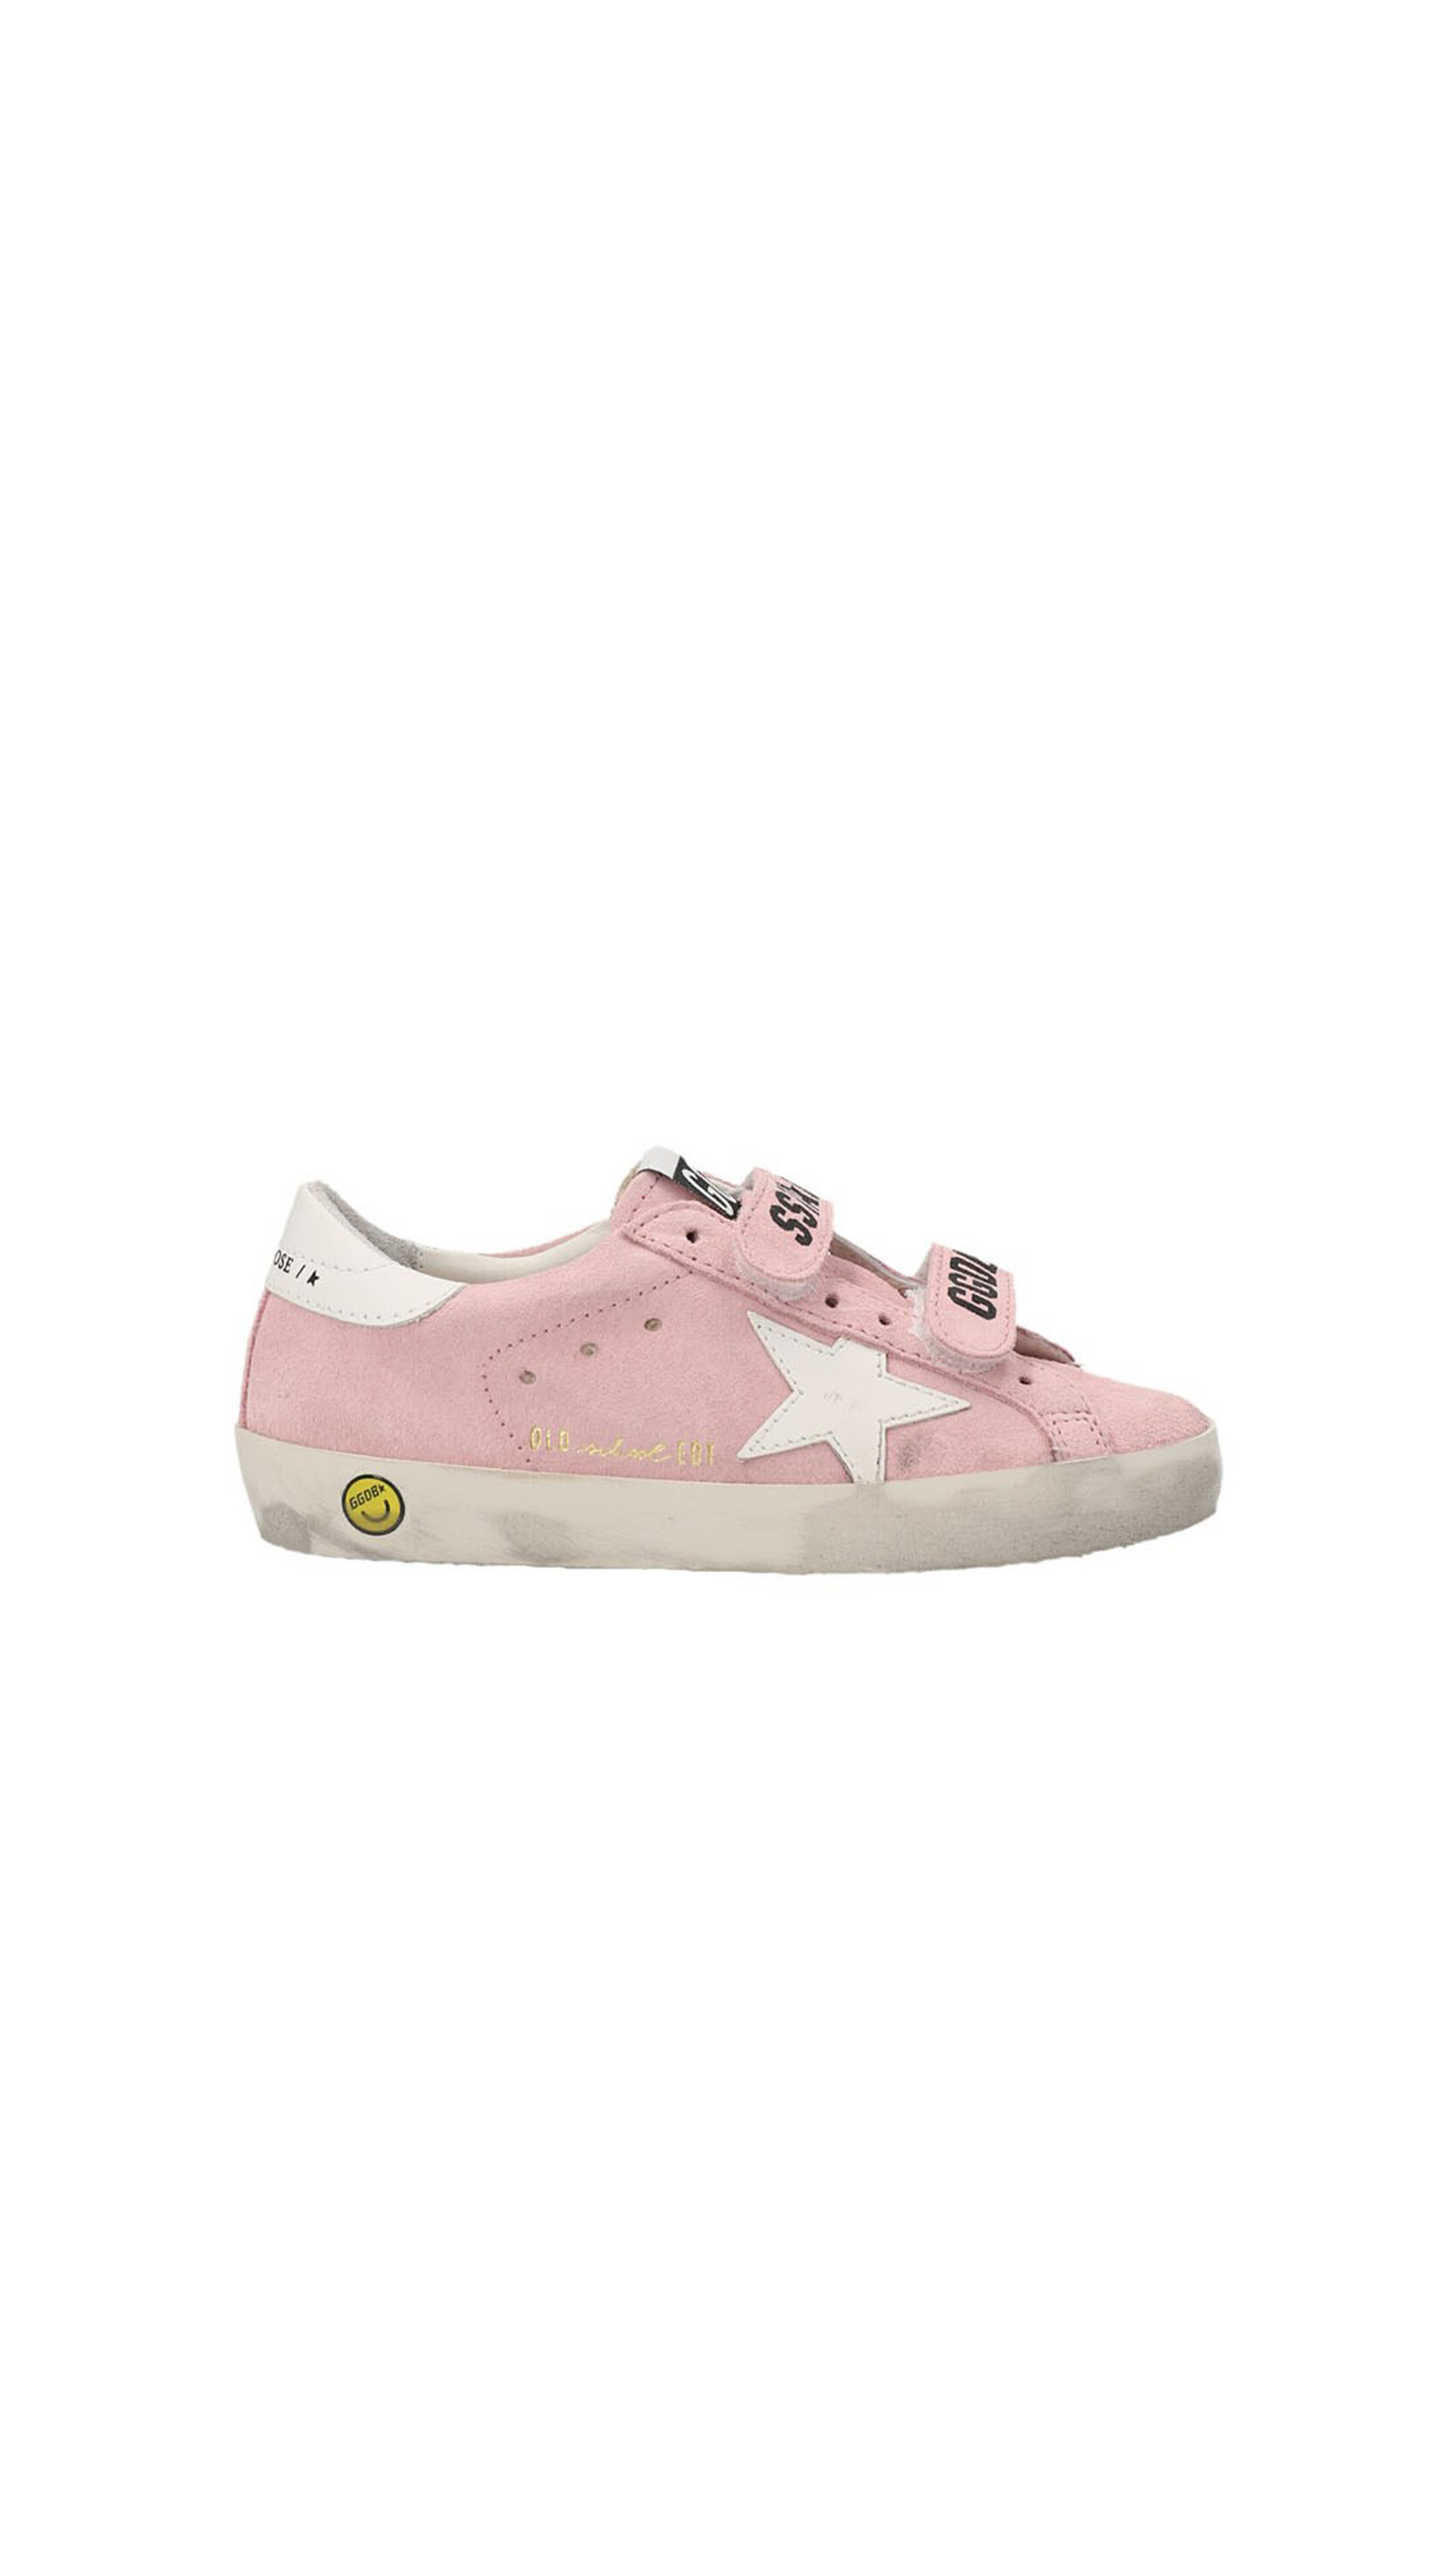 Old School Sneakers With Velcro Closure - Pink